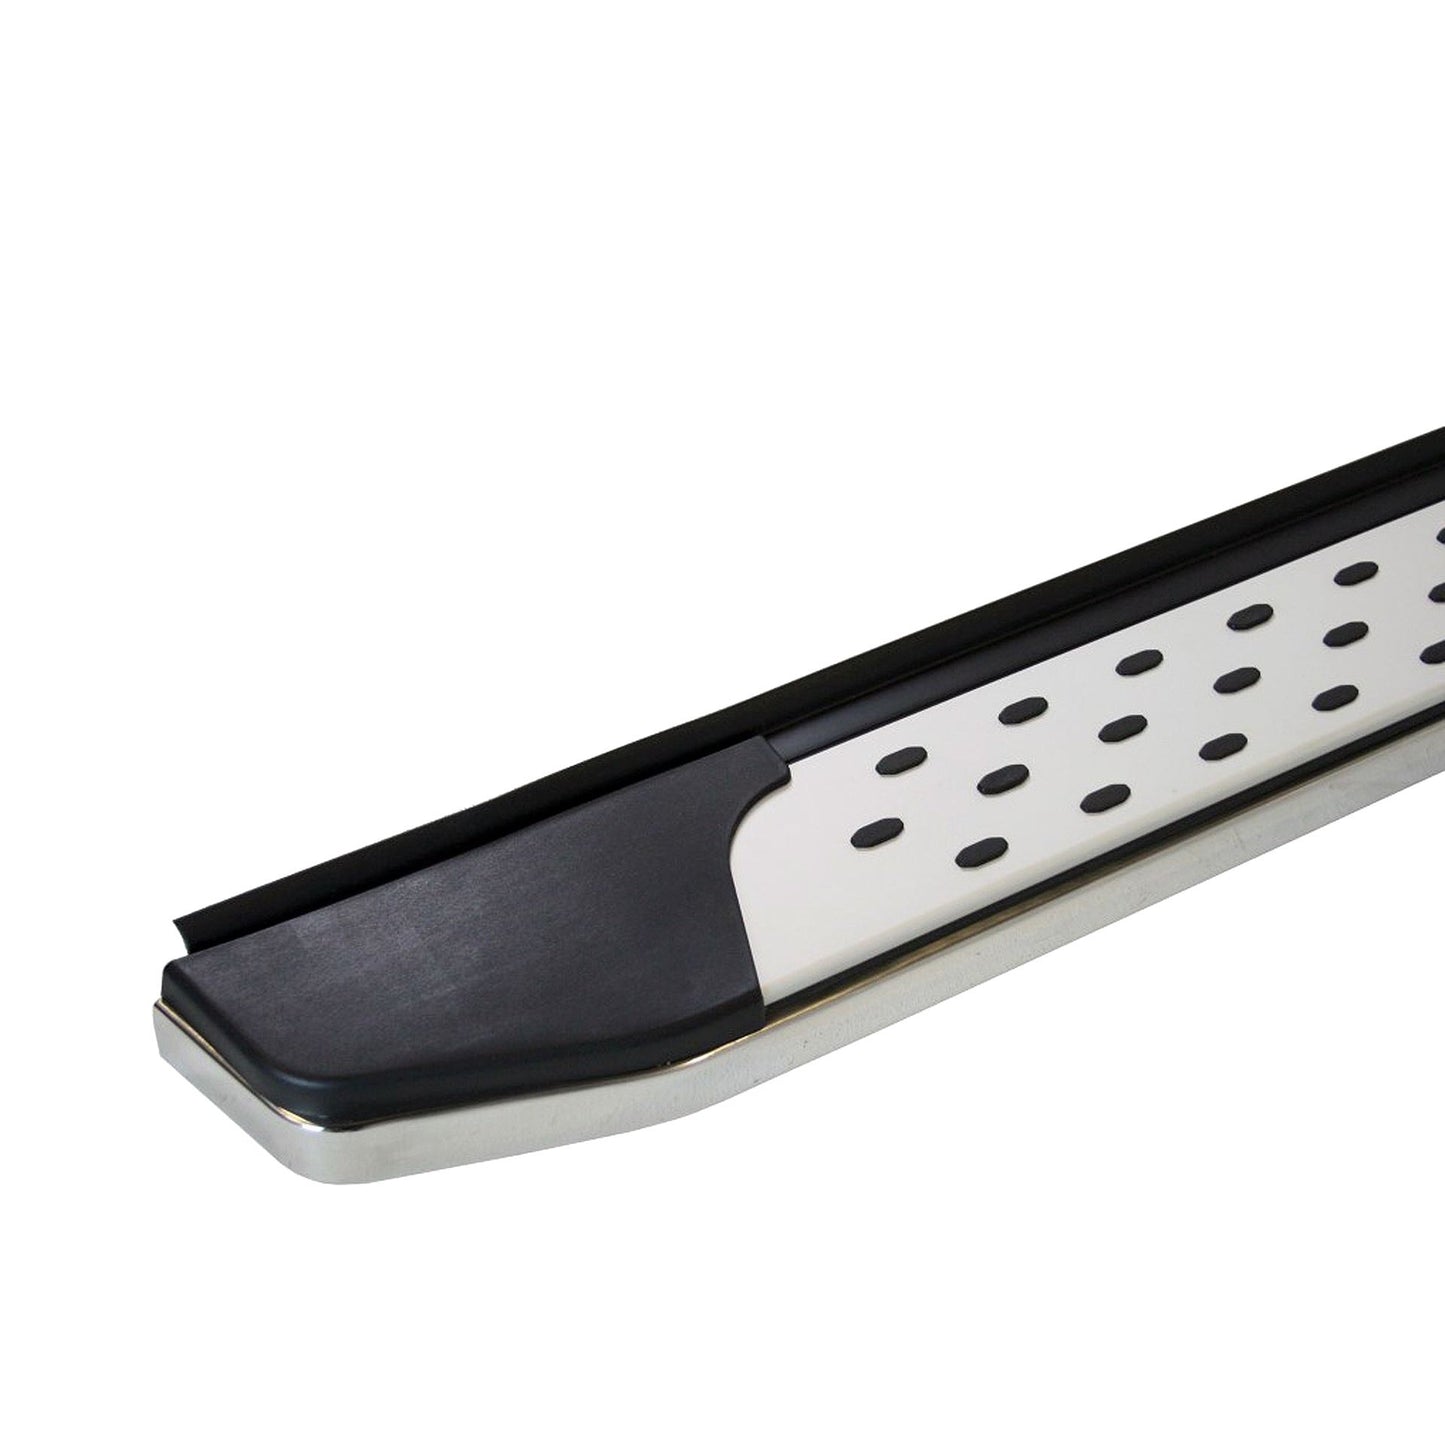 Freedom Side Steps Running Boards for Range Rover Sport 2005-2013 (L320) -  - sold by Direct4x4